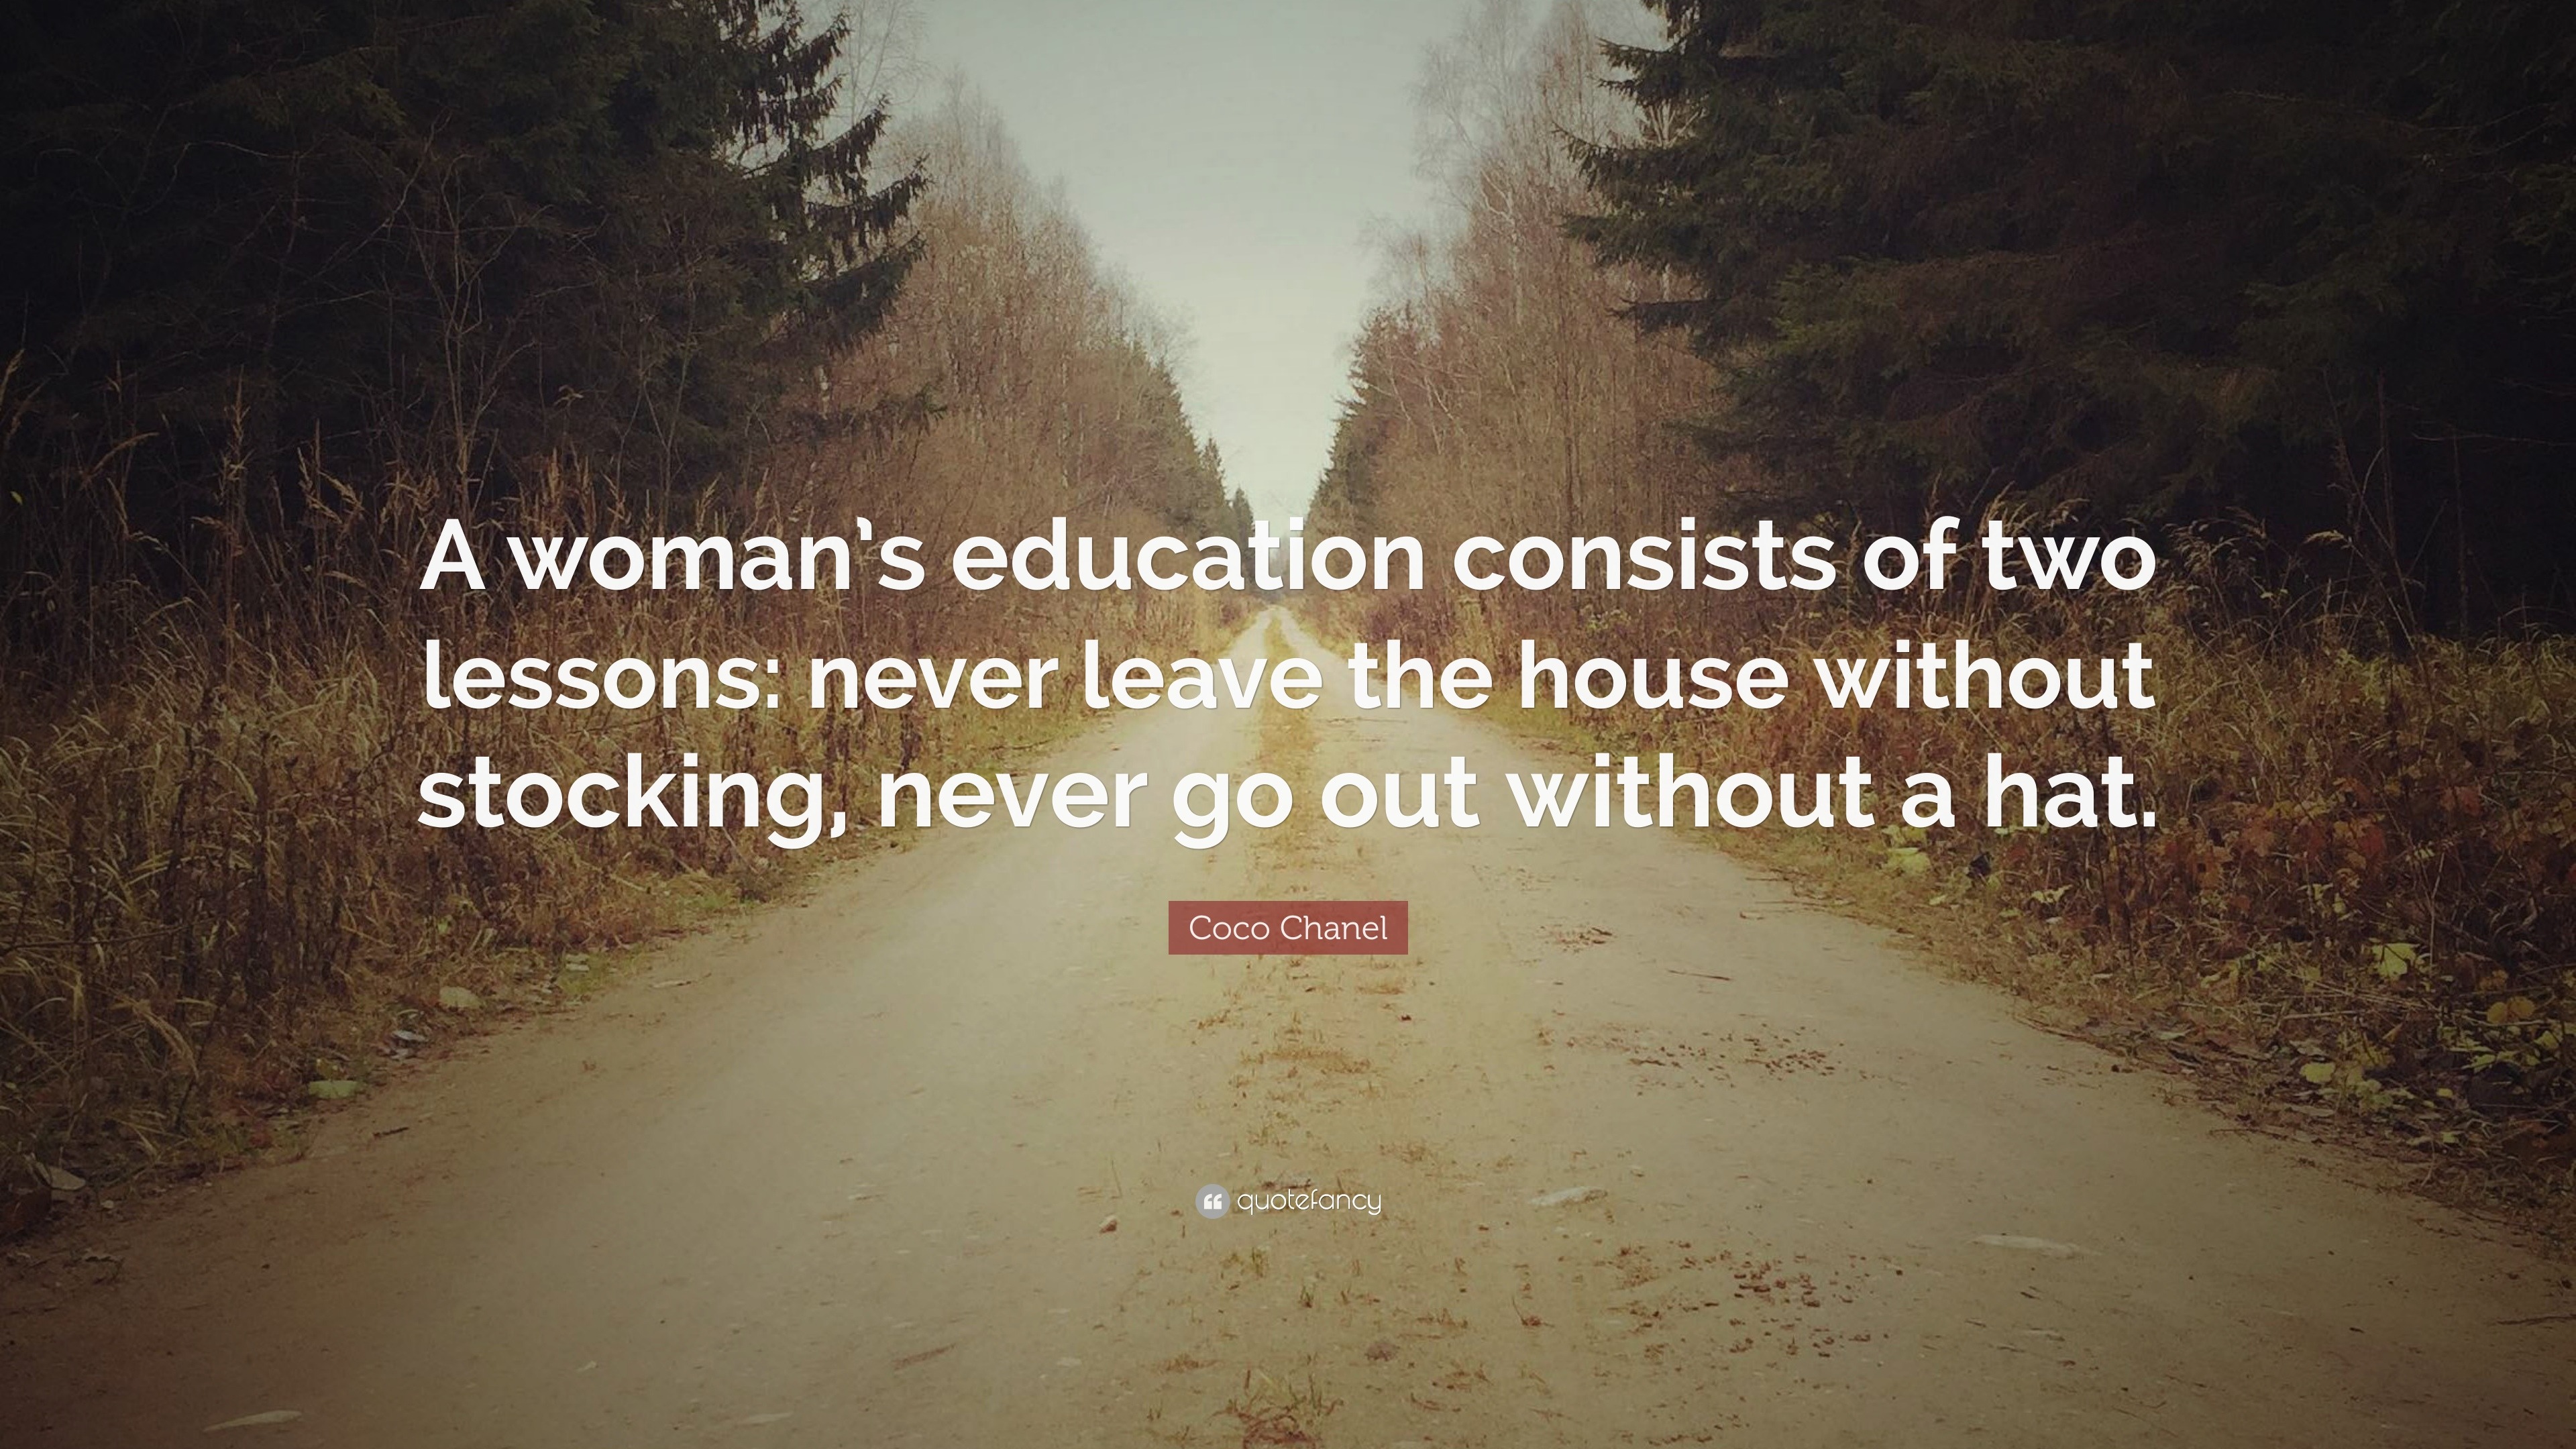 Coco Chanel Quote: “A woman's education consists of two lessons: never  leave the house without stocking